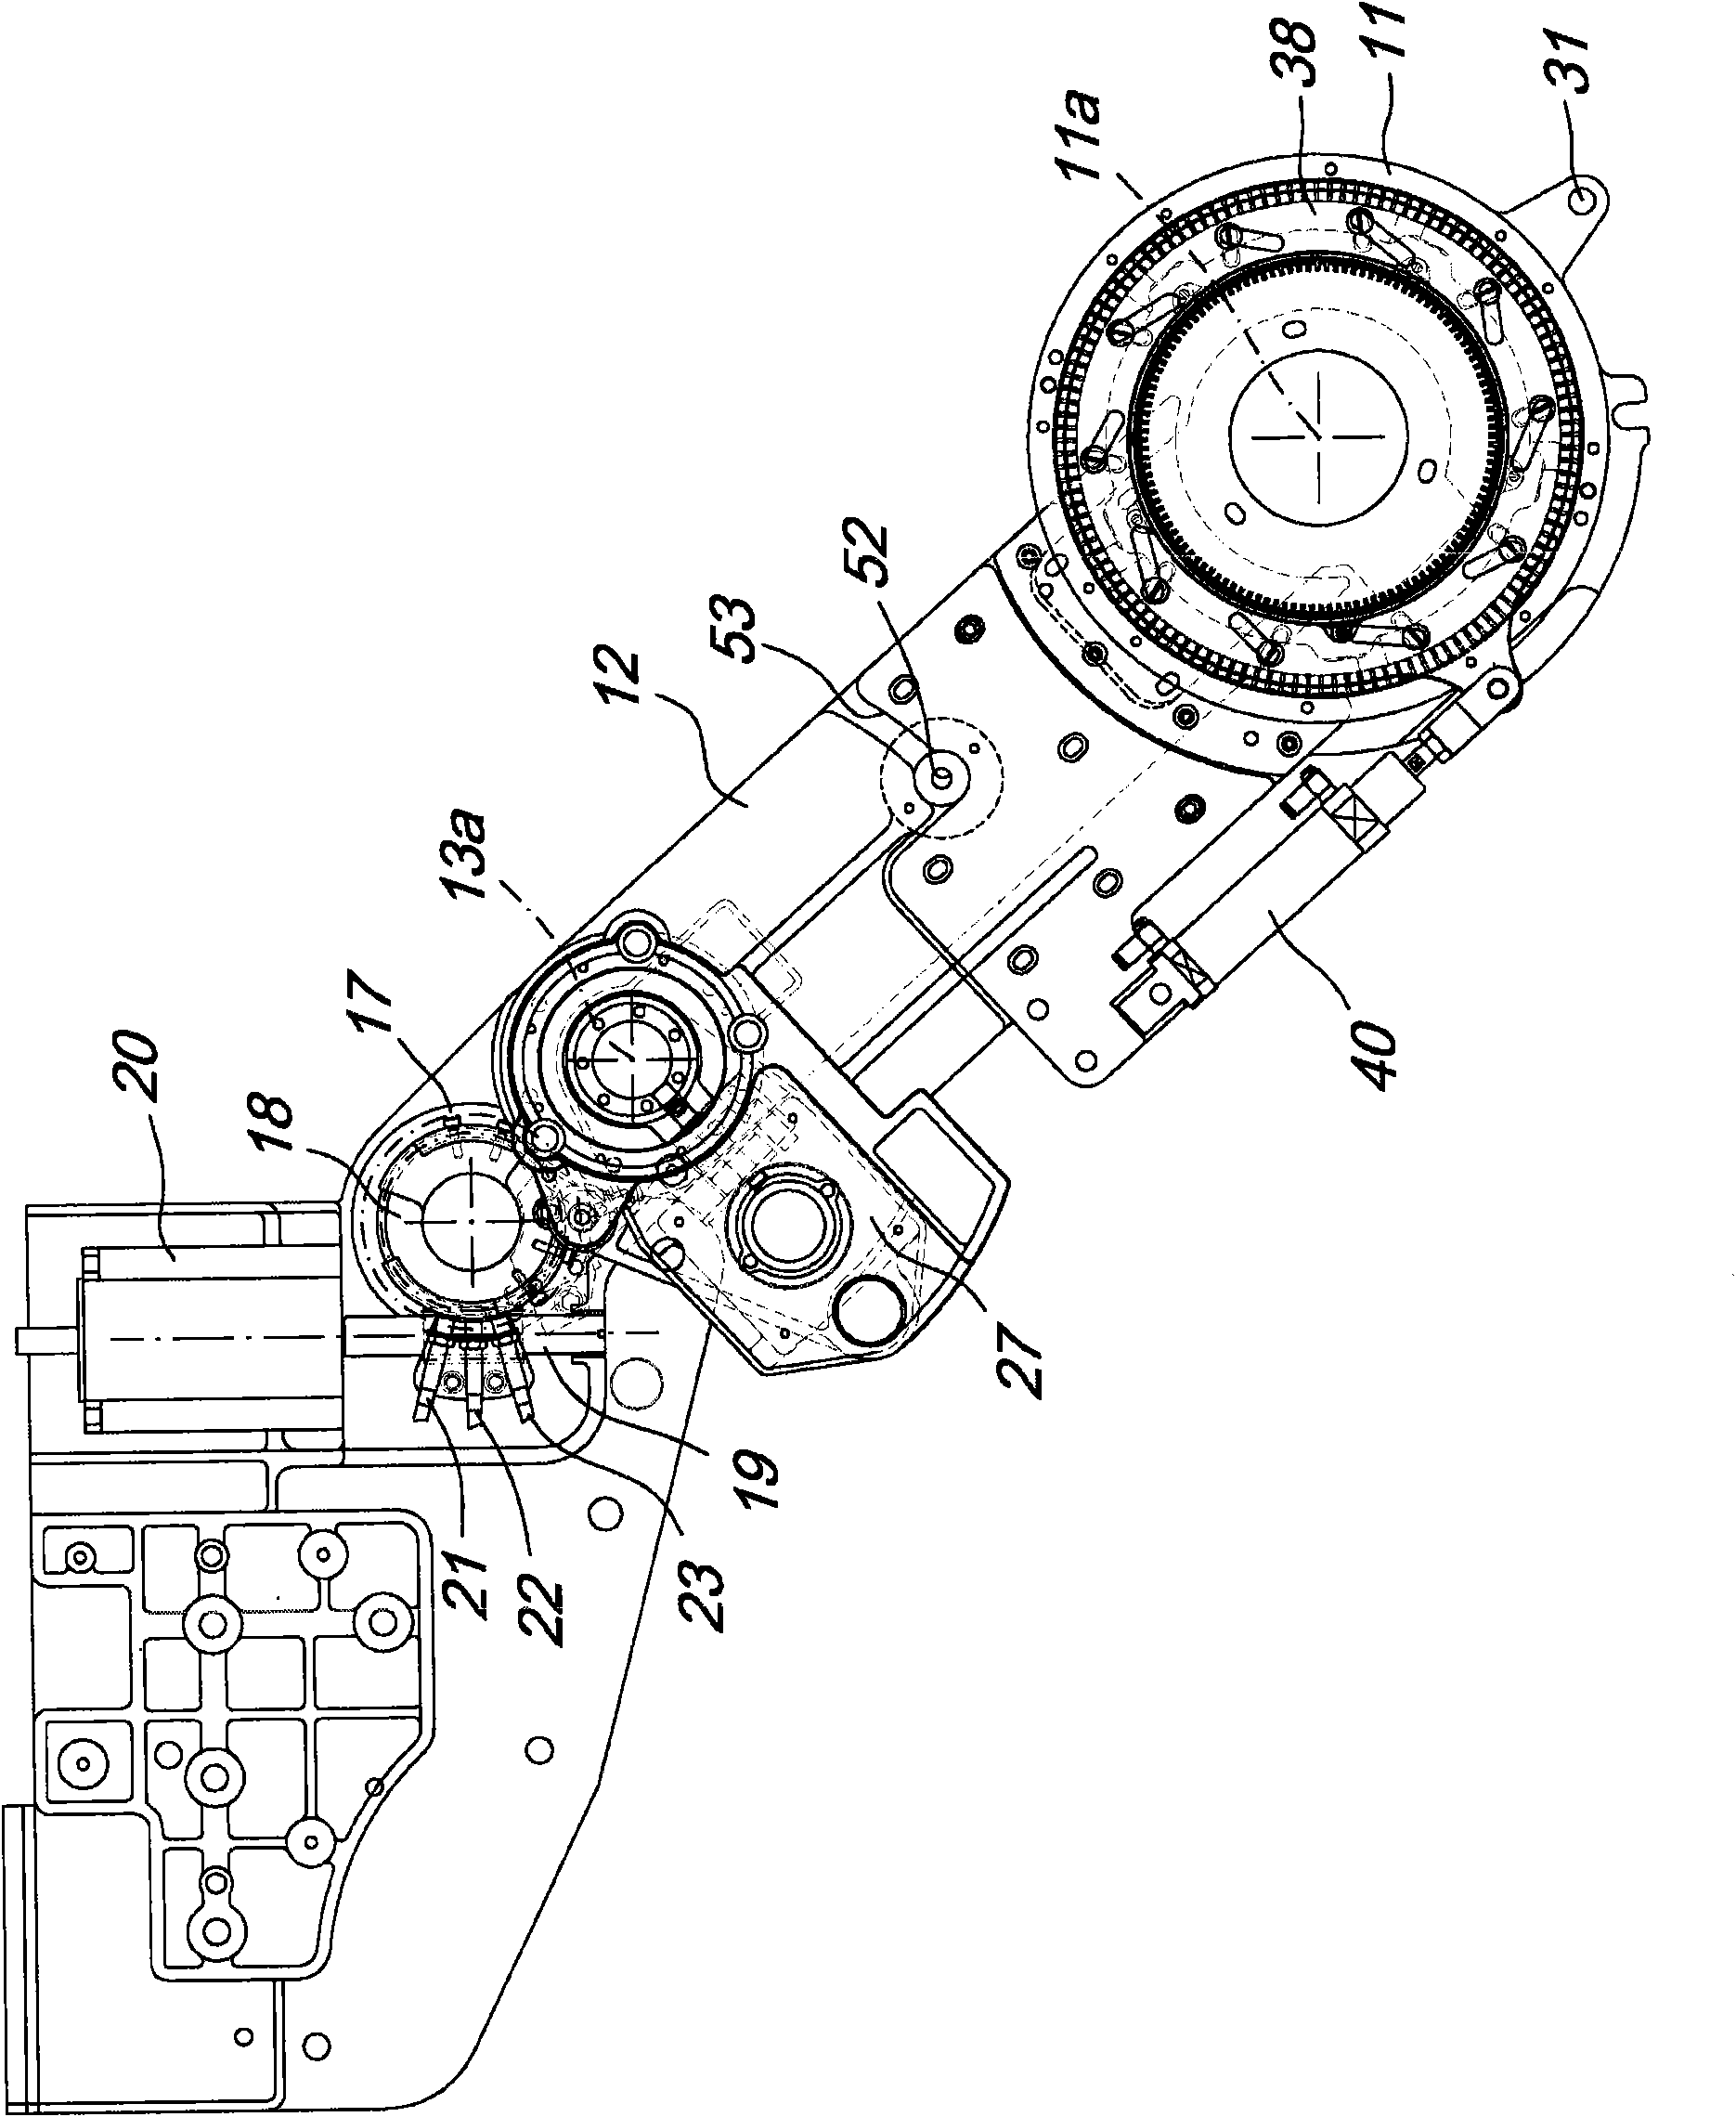 Pick-up device for picking up a tubular knitted article from a circular knitting machine for hosiery or the like and for transferring it to a unit adapted to perform additional work on the article